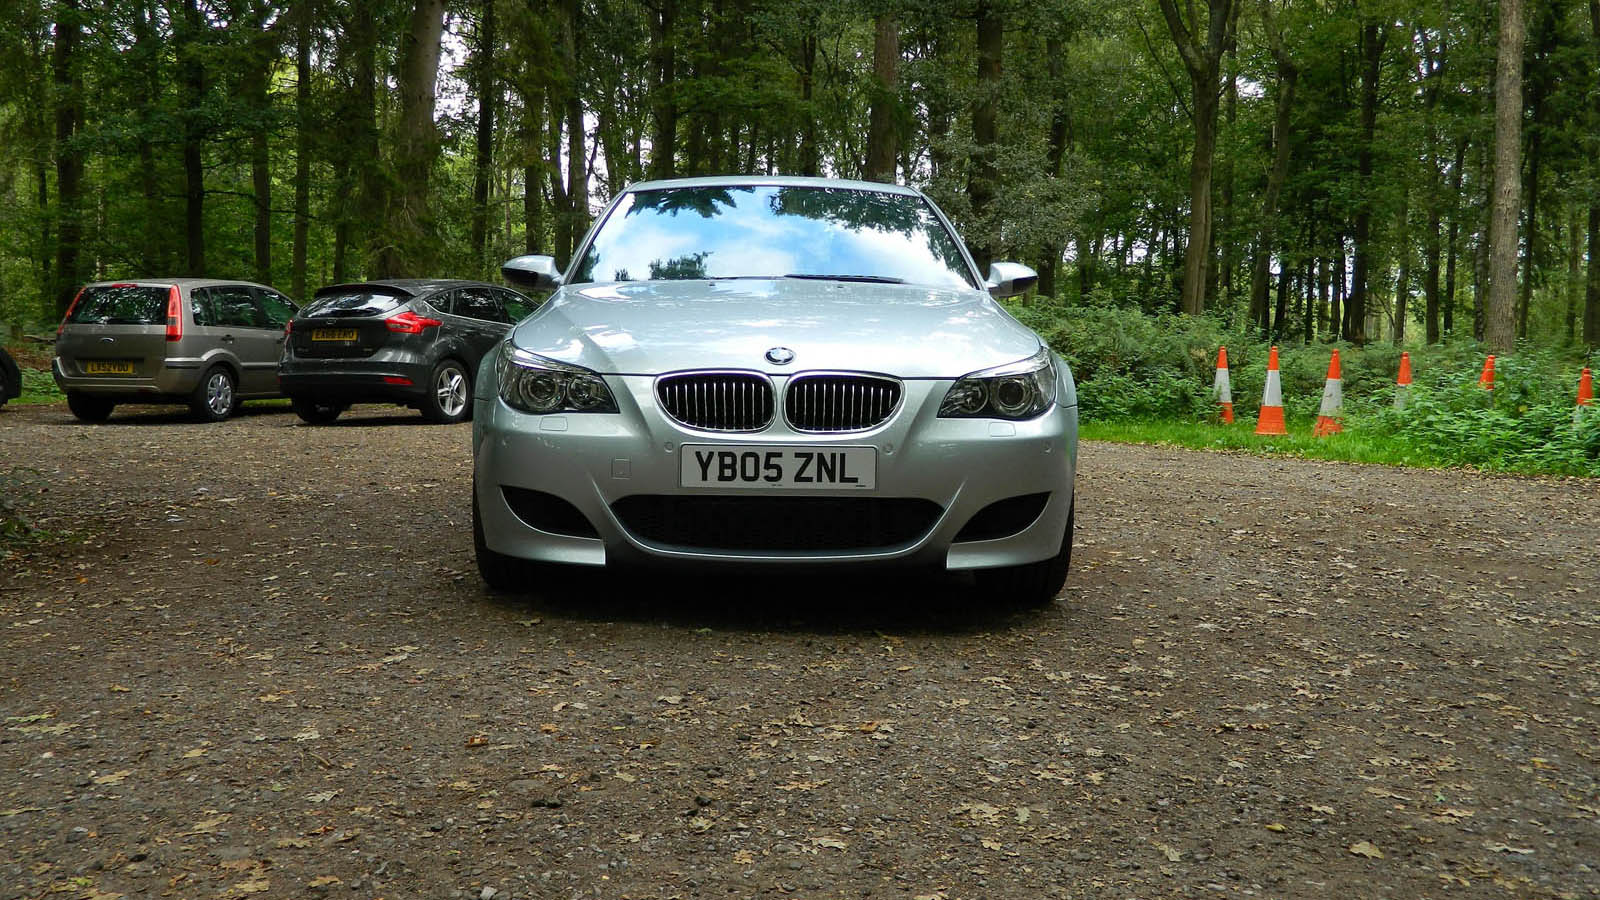 2005 BMW (E60) M5 for sale by auction in Chester, Cheshire, United Kingdom